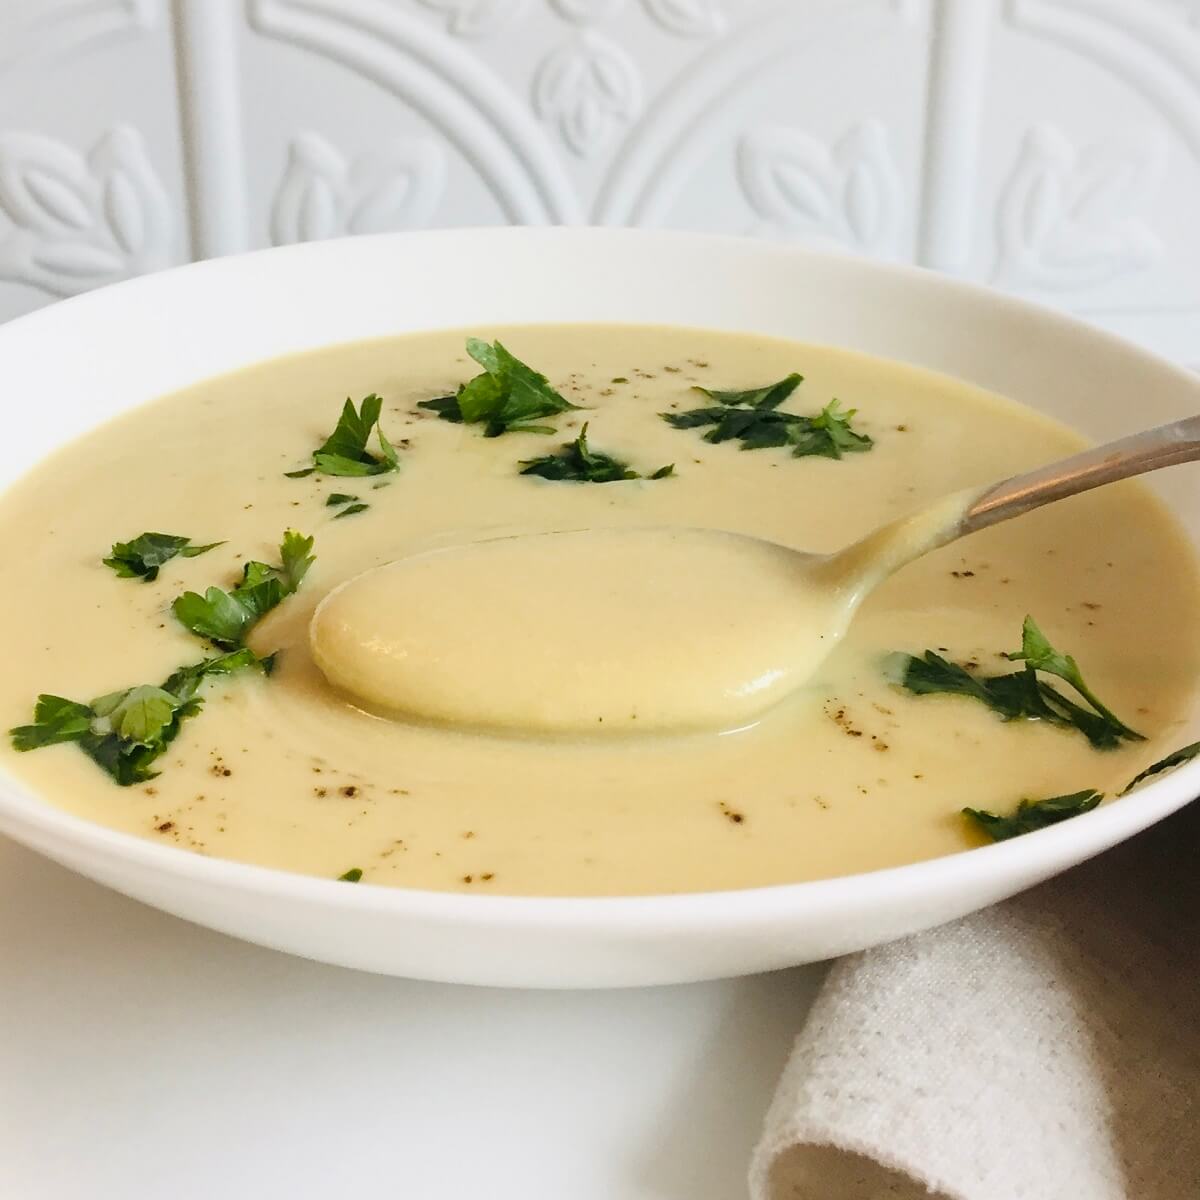 A bowl of creamy soup with parsley sprinkled on top.